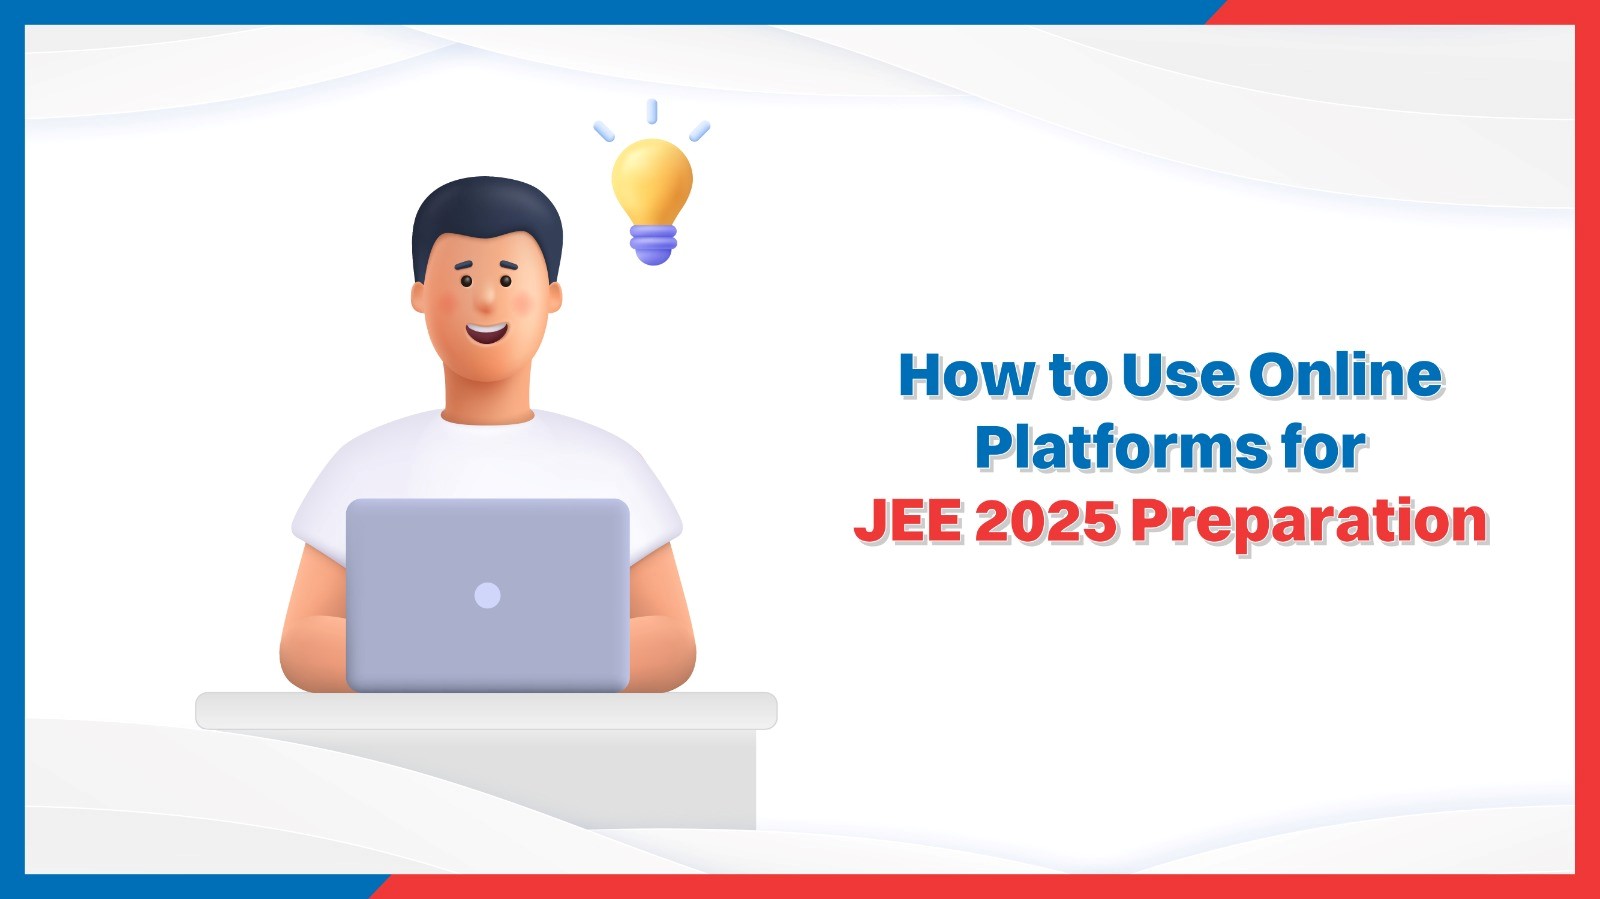 How to Use Online Platforms for JEE 2025 Preparation.jpg